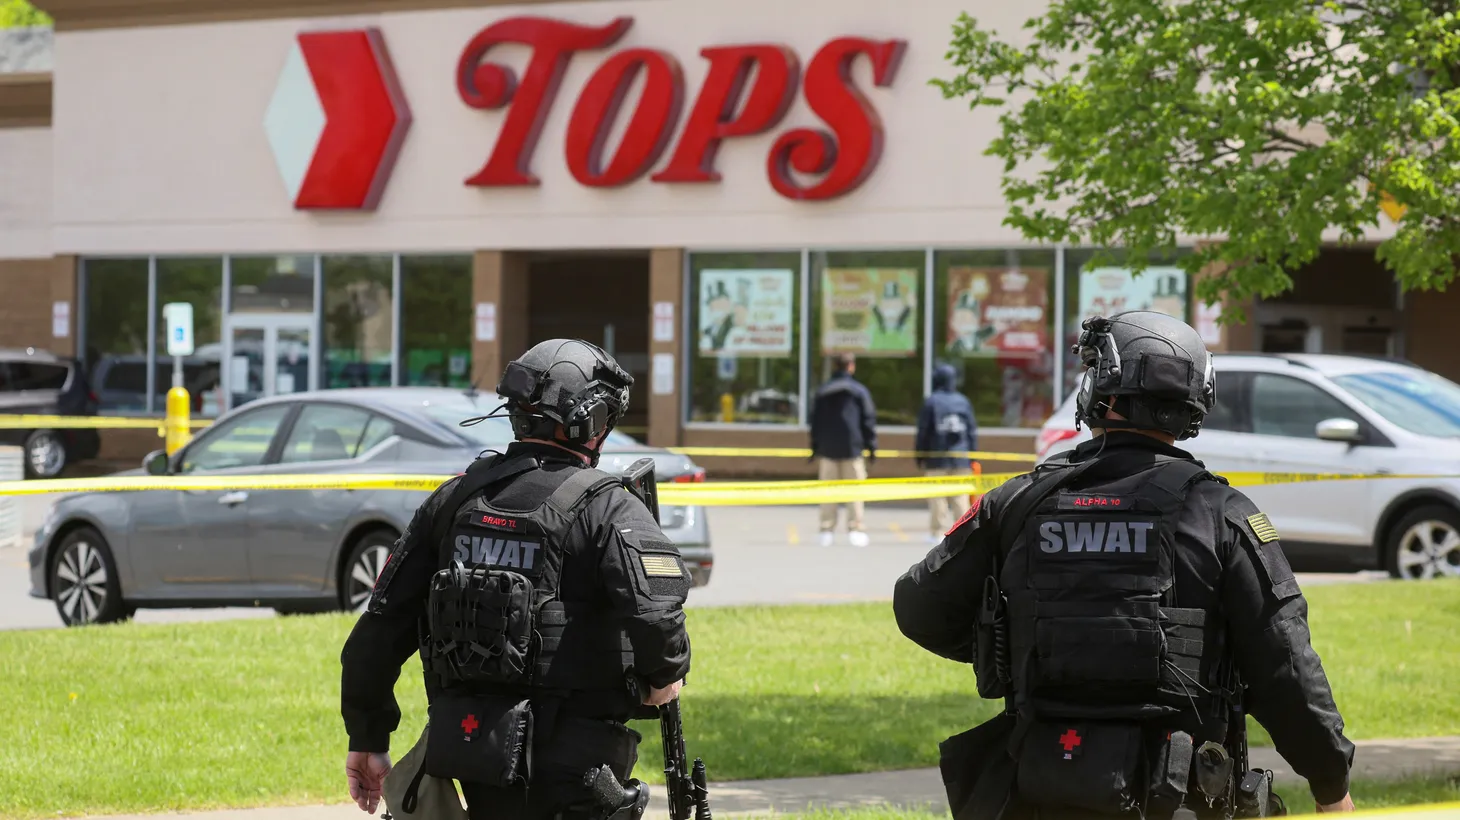 Members of the Buffalo police department work at the scene of a shooting at a Tops supermarket in Buffalo, New York, U.S. May 17, 2022.